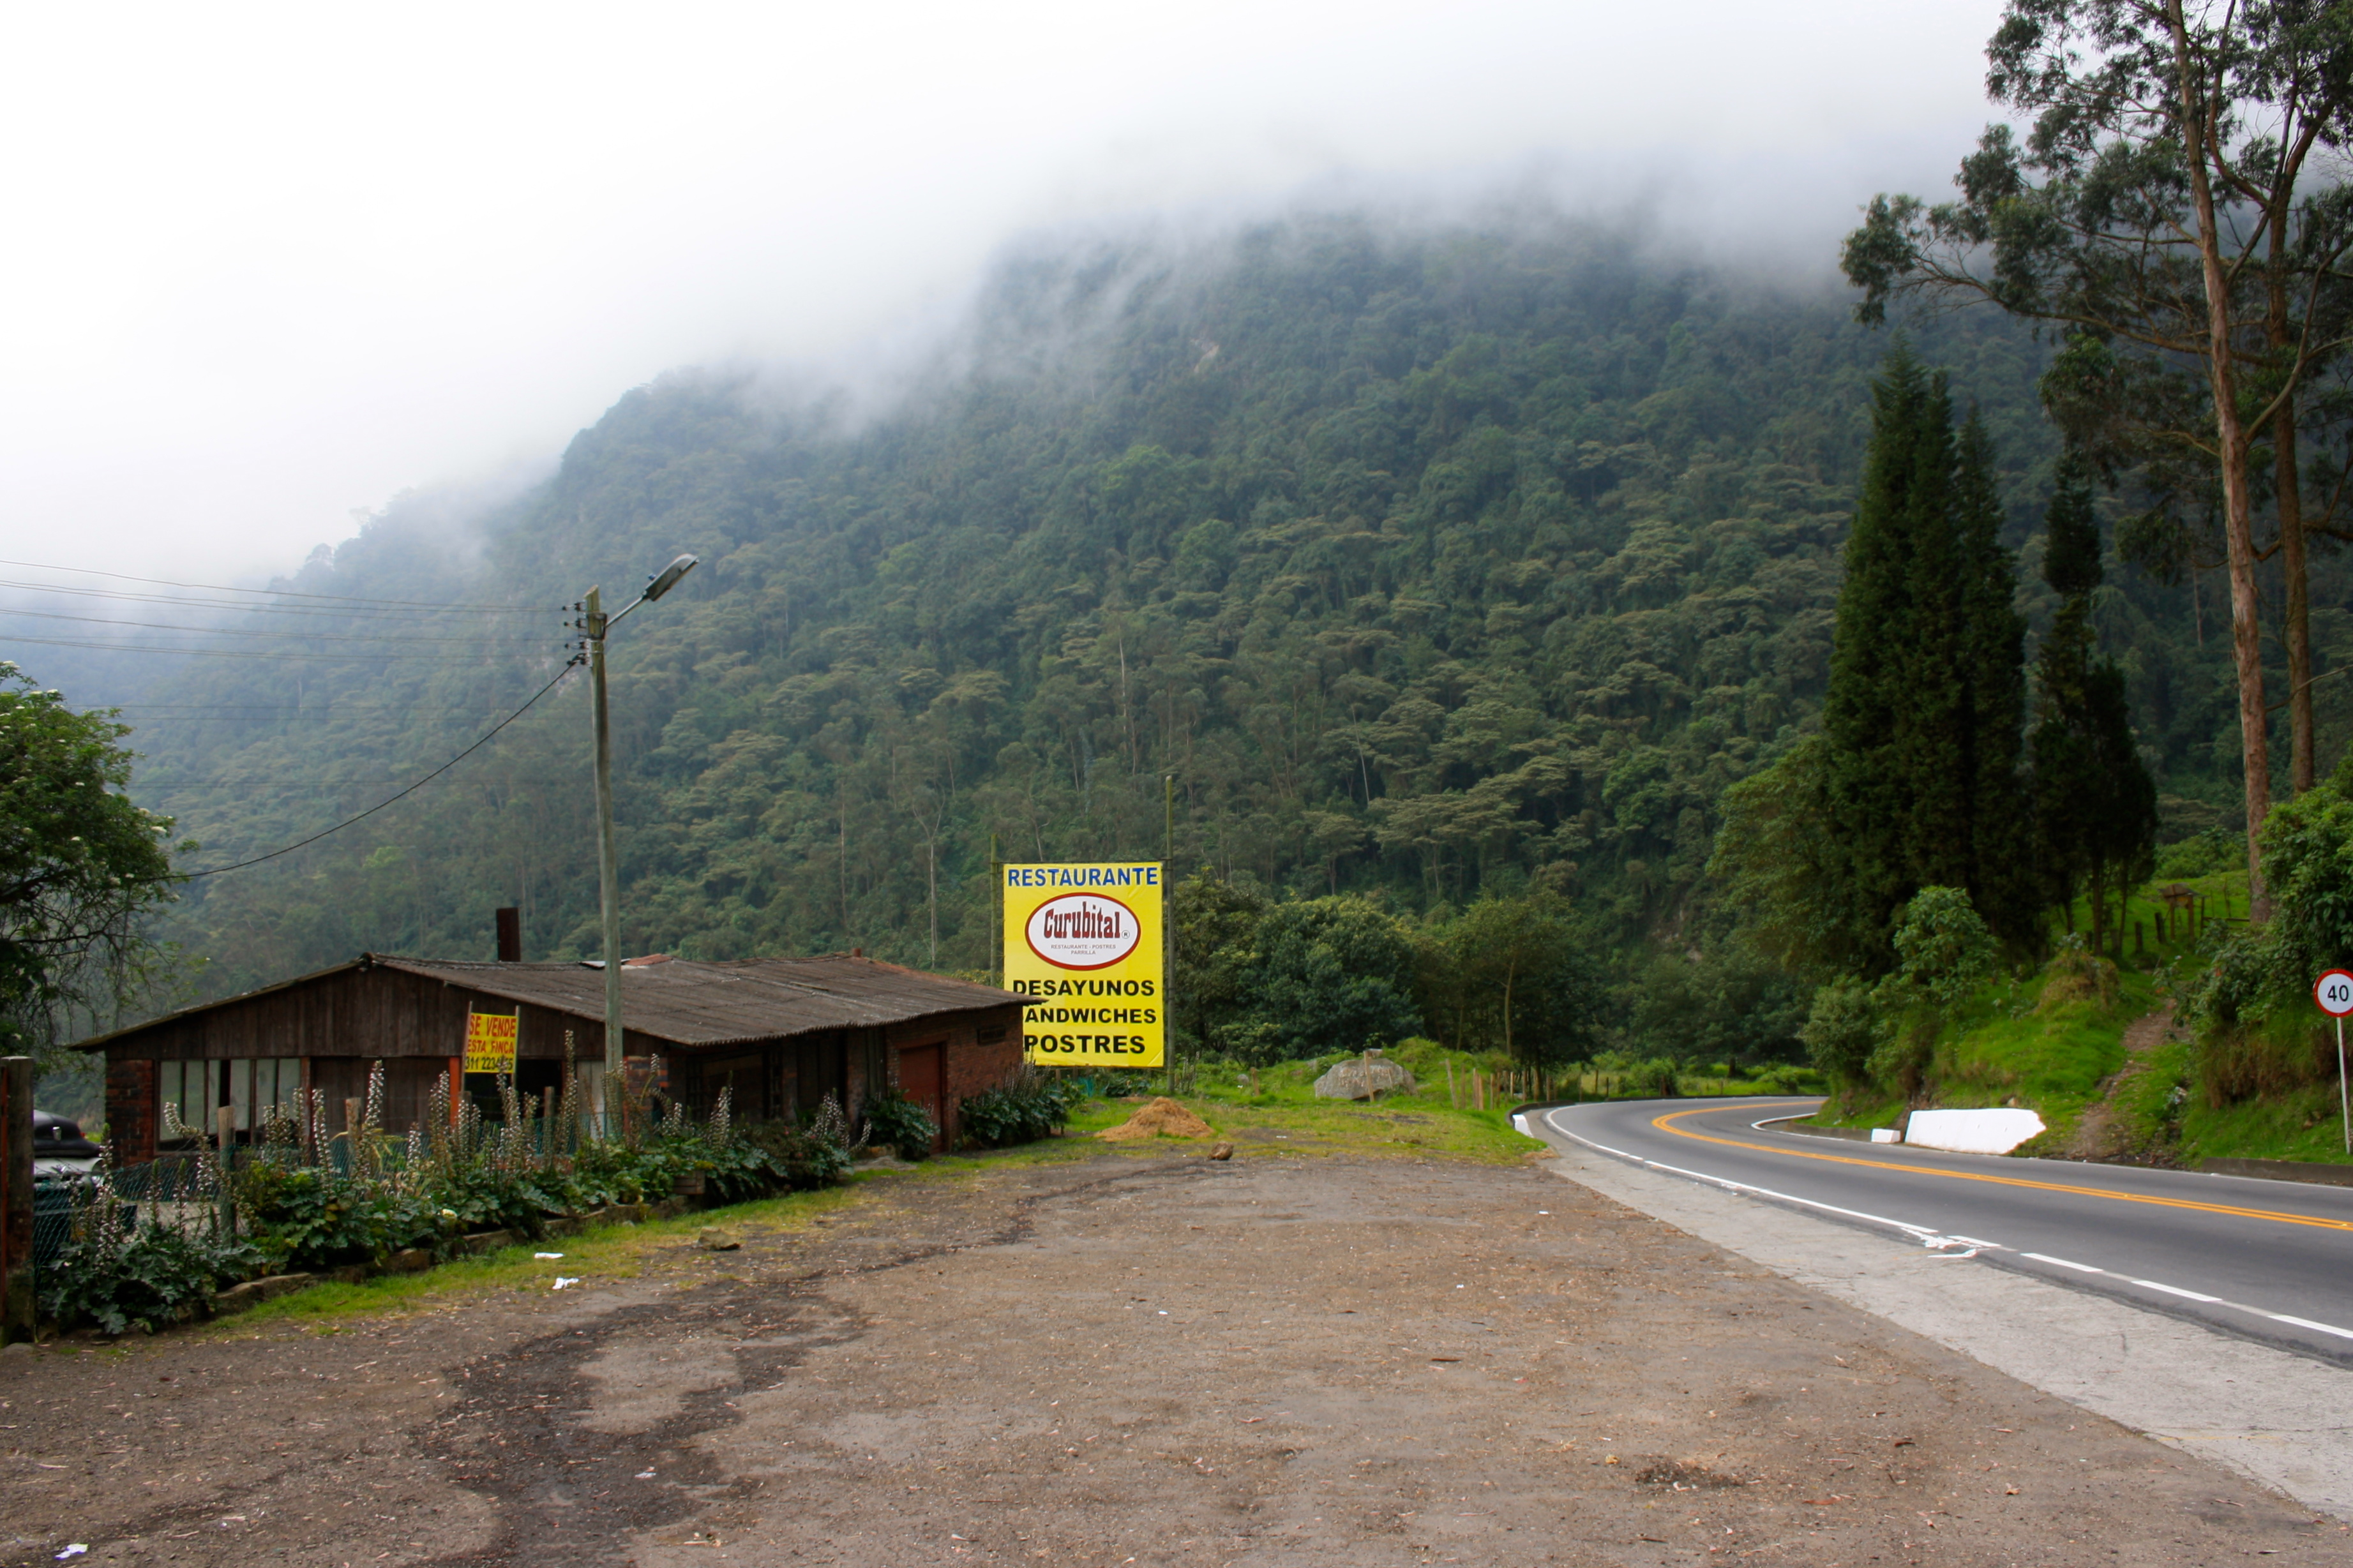 The road from Bogota